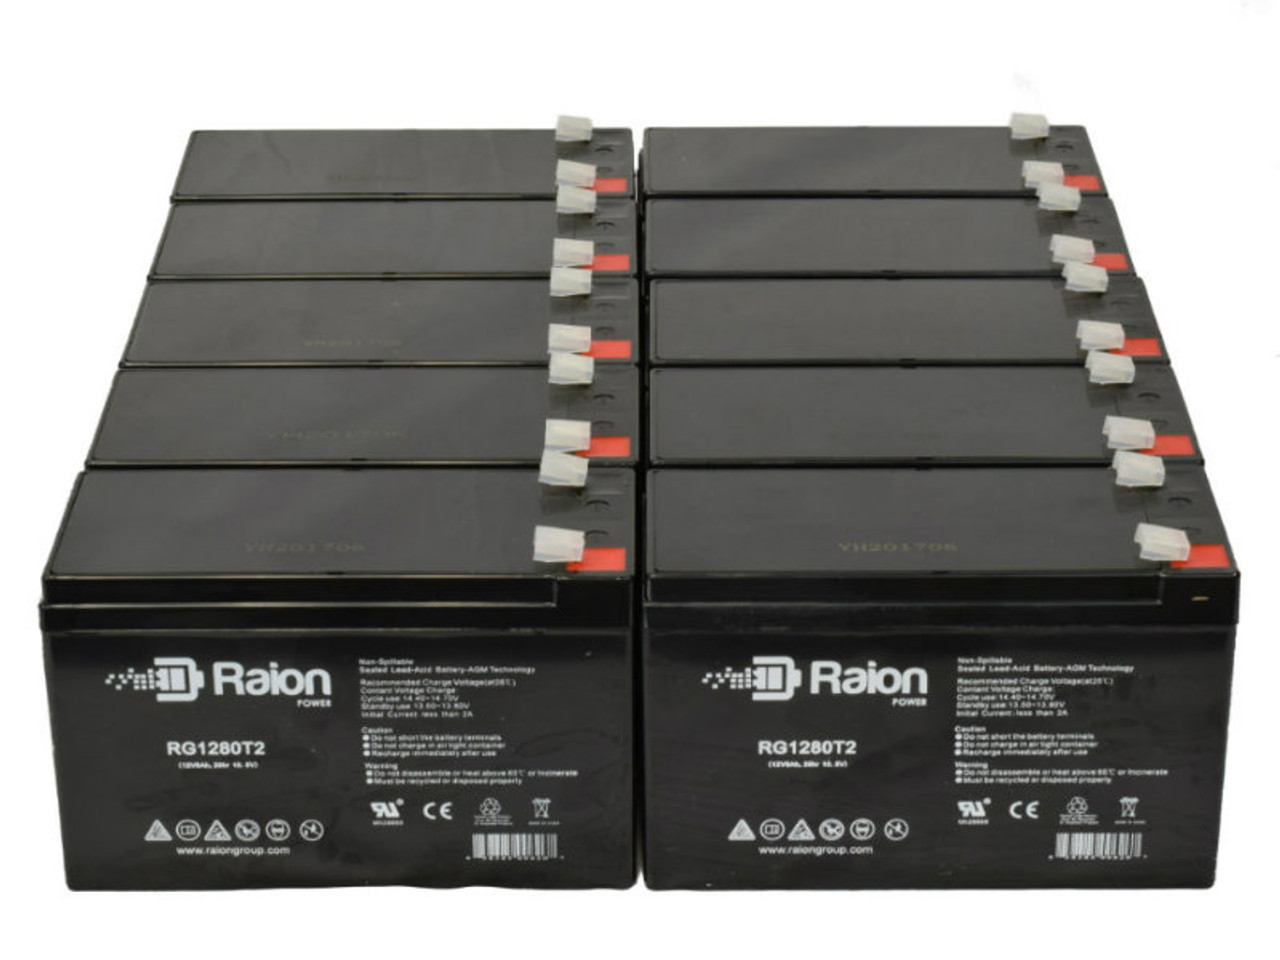 Raion Power Replacement 12V 8Ah RG1280T2 Battery for Gould Sp1405 Physiological Monitor - 10 Pack